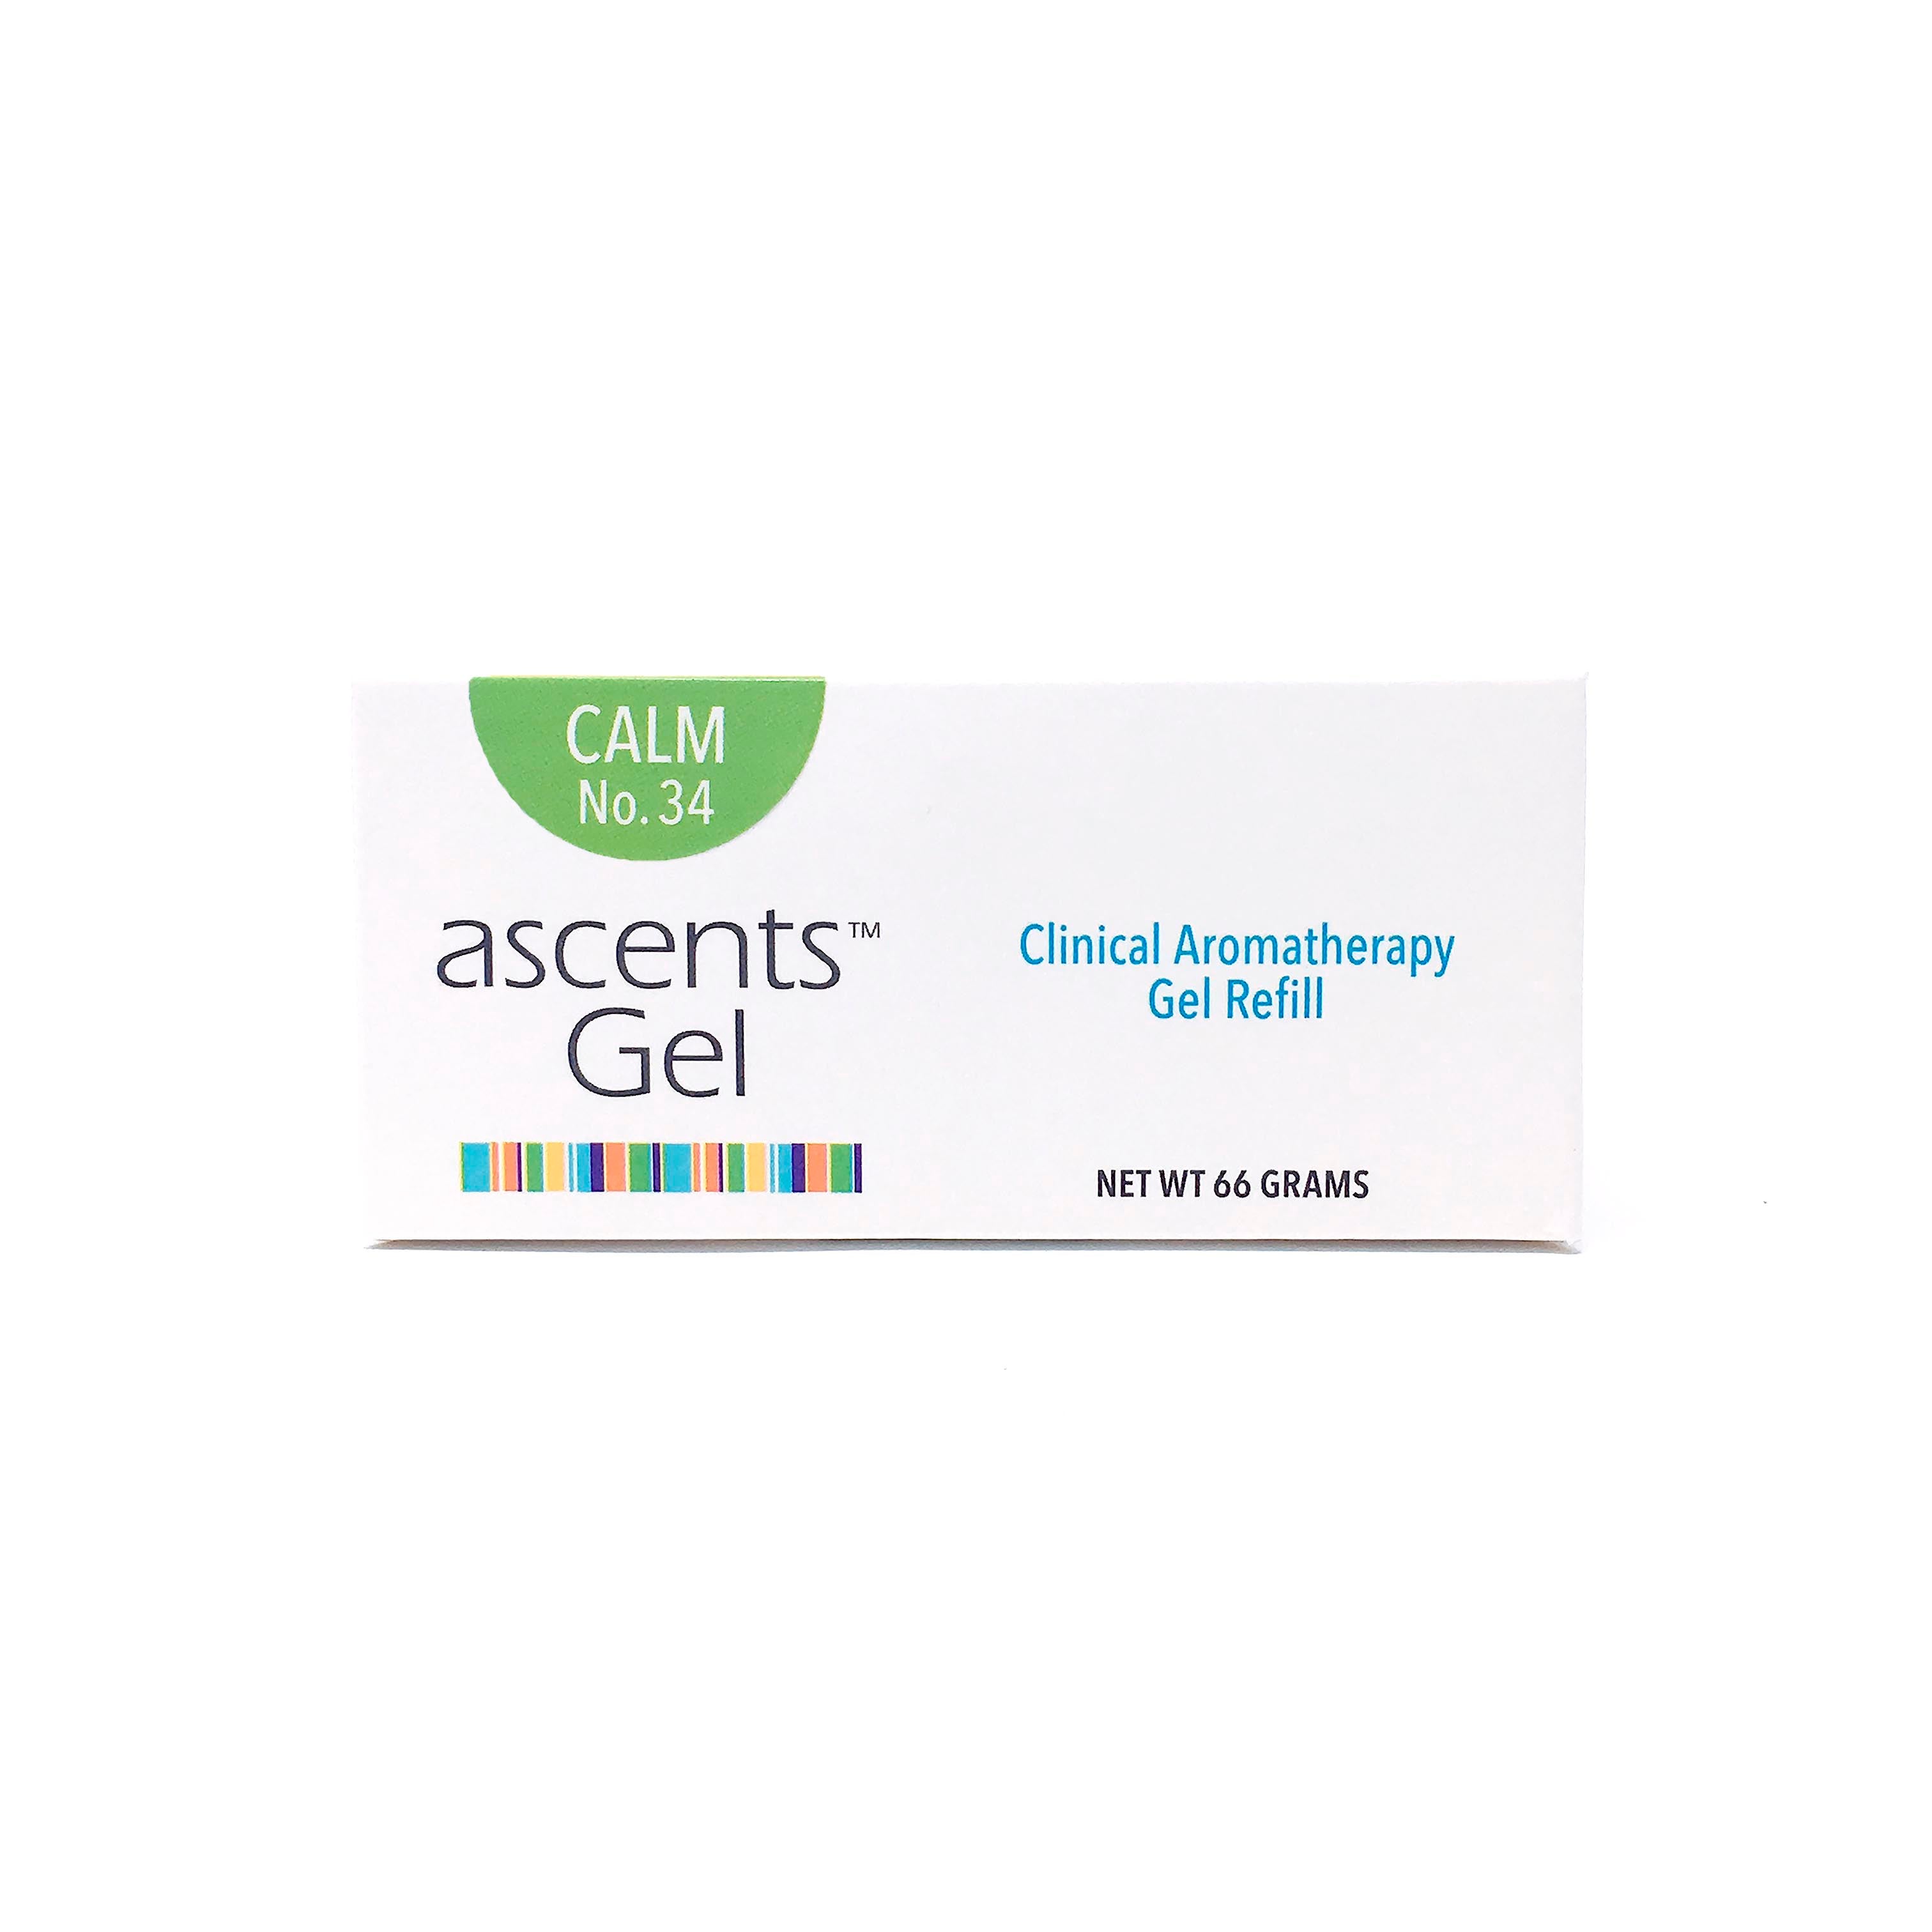 Calm Gel - For Stress & Anxiety